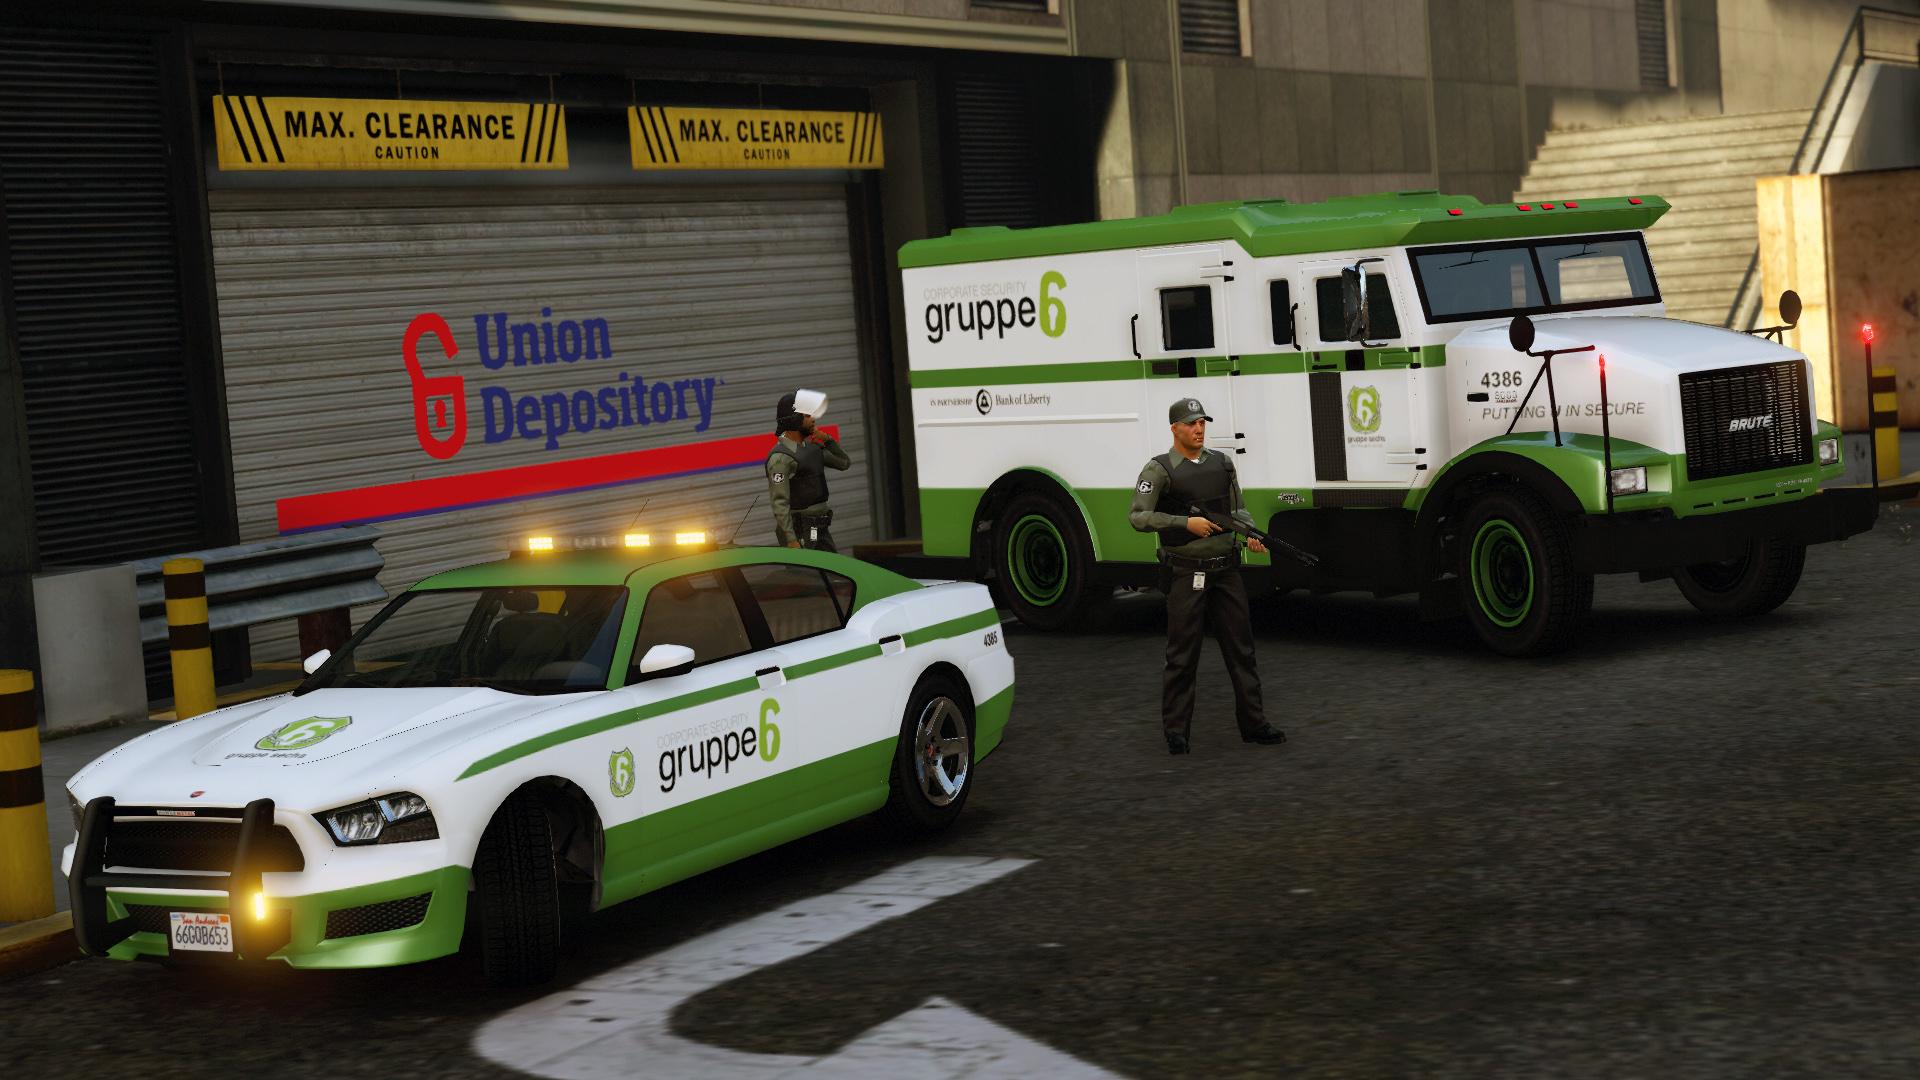 how to install police cars in gta 5